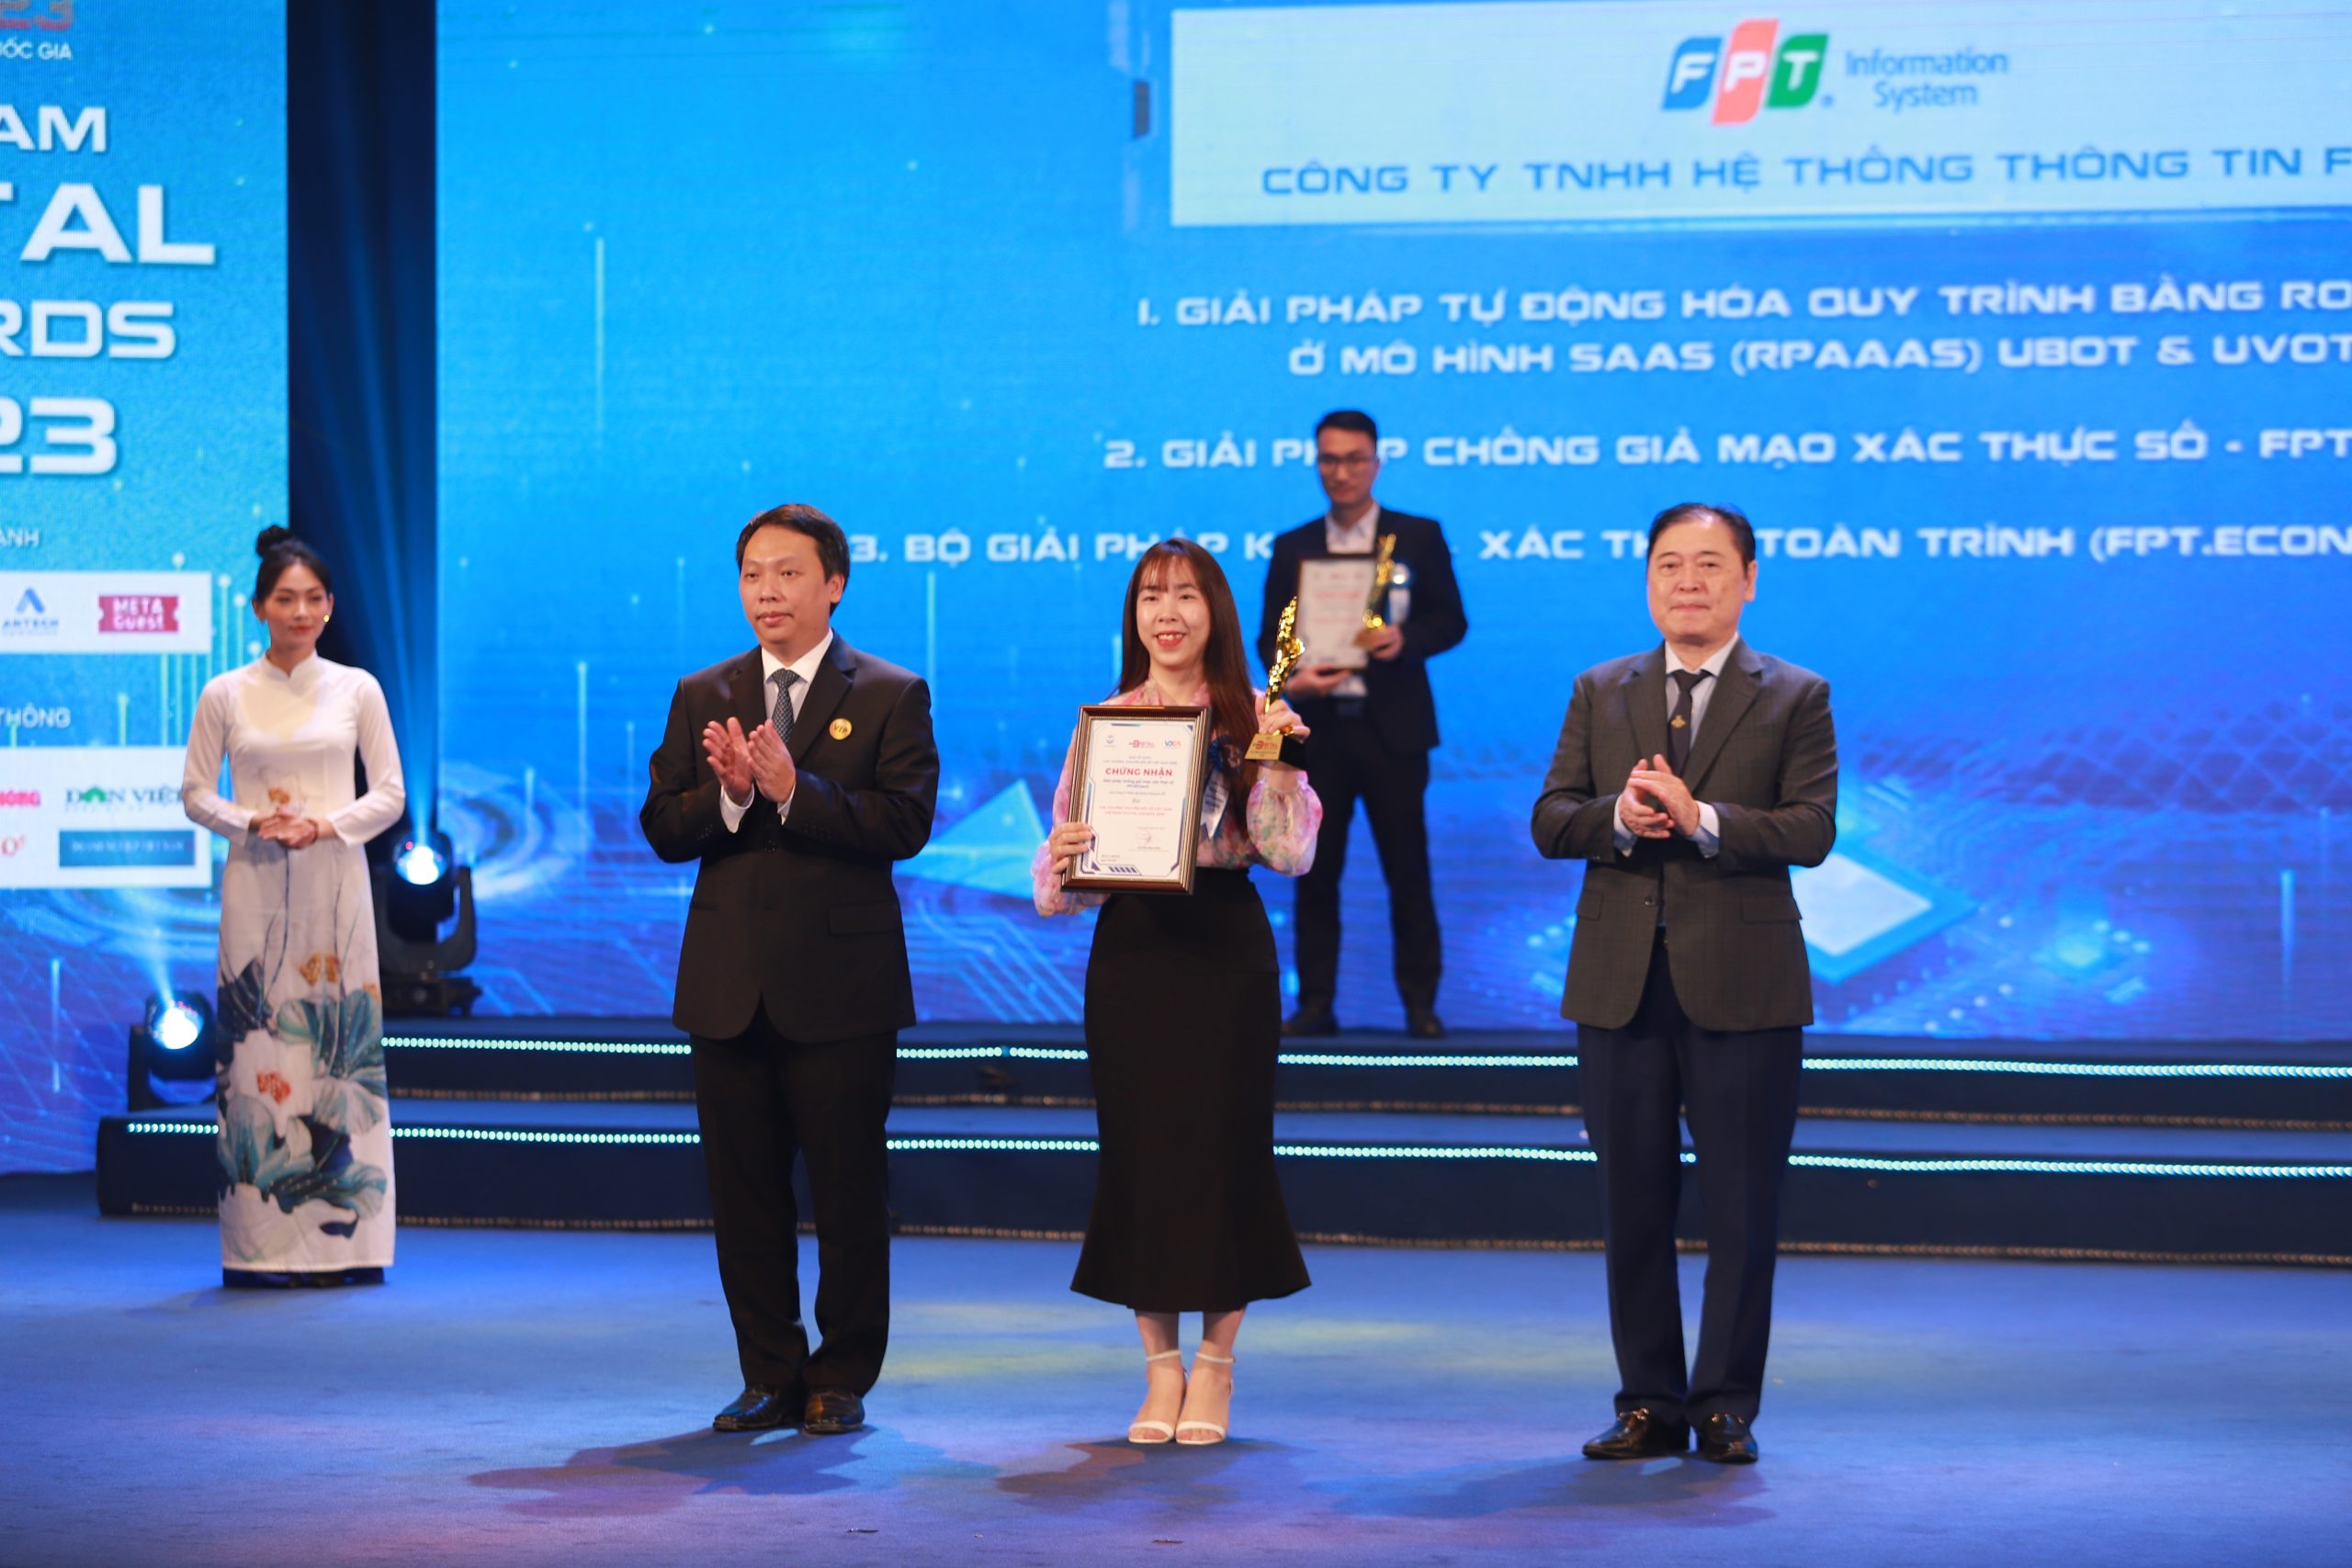 2023 Vietnam Digital Awards – Electronic Contract & Certified e-Contract Authority Solutions (FPT.eContract & FPT.CeCA)